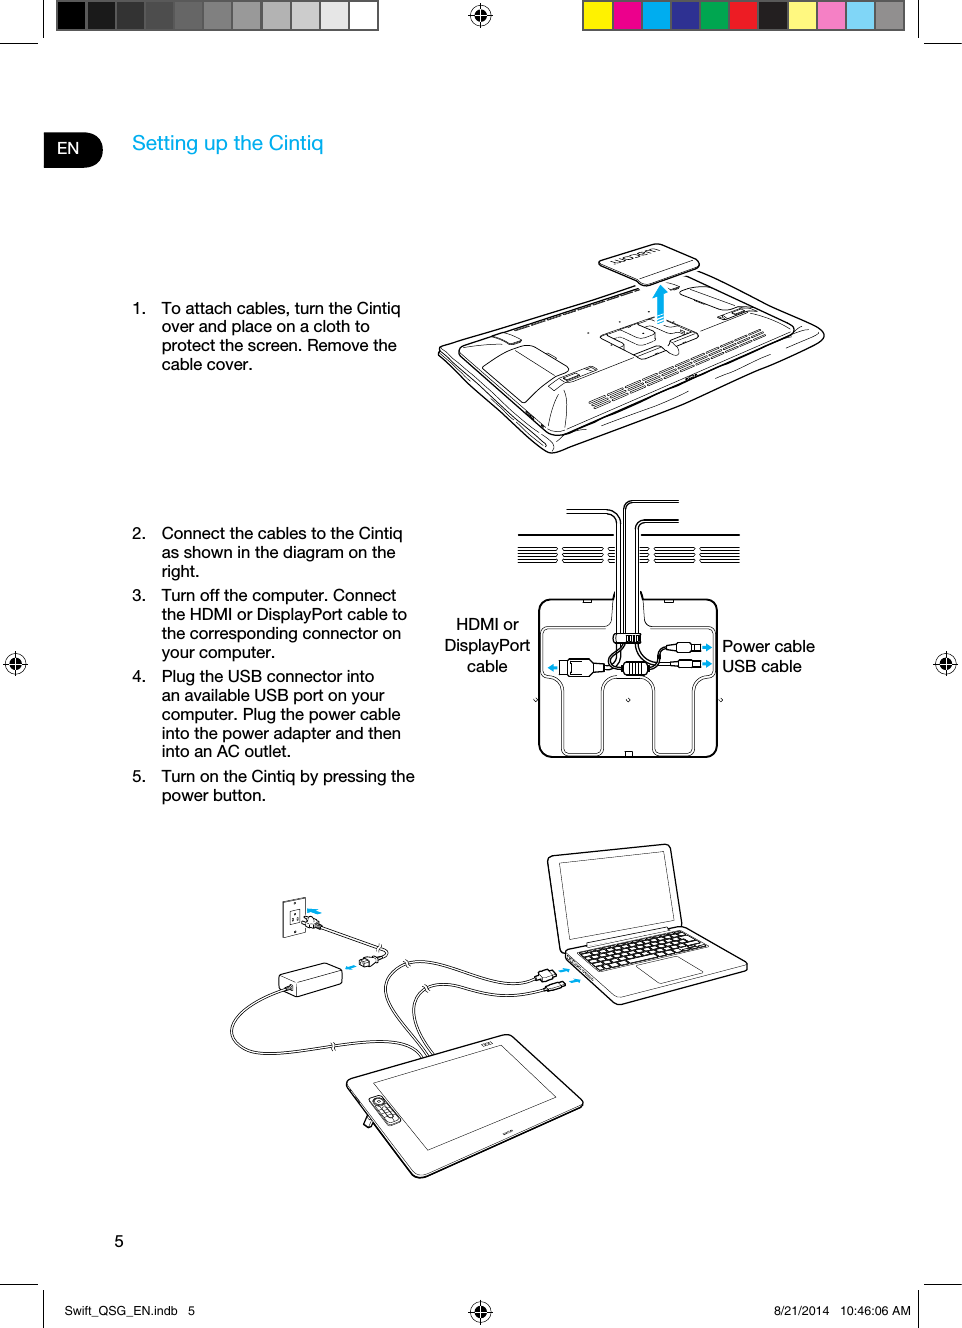 5ENSetting up the Cintiq1.  To attach cables, turn the Cintiq over and place on a cloth to protect the screen. Remove the cable cover.2.  Connect the cables to the Cintiq as shown in the diagram on the right.3.  Turn off the computer. Connect the HDMI or DisplayPort cable to the corresponding connector on your computer.4.  Plug the USB connector into an available USB port on your computer. Plug the power cable into the power adapter and then into an AC outlet.5.  Turn on the Cintiq by pressing the power button.HDMI or DisplayPort cablePower cableUSB cableSwift_QSG_EN.indb   5 8/21/2014   10:46:06 AM